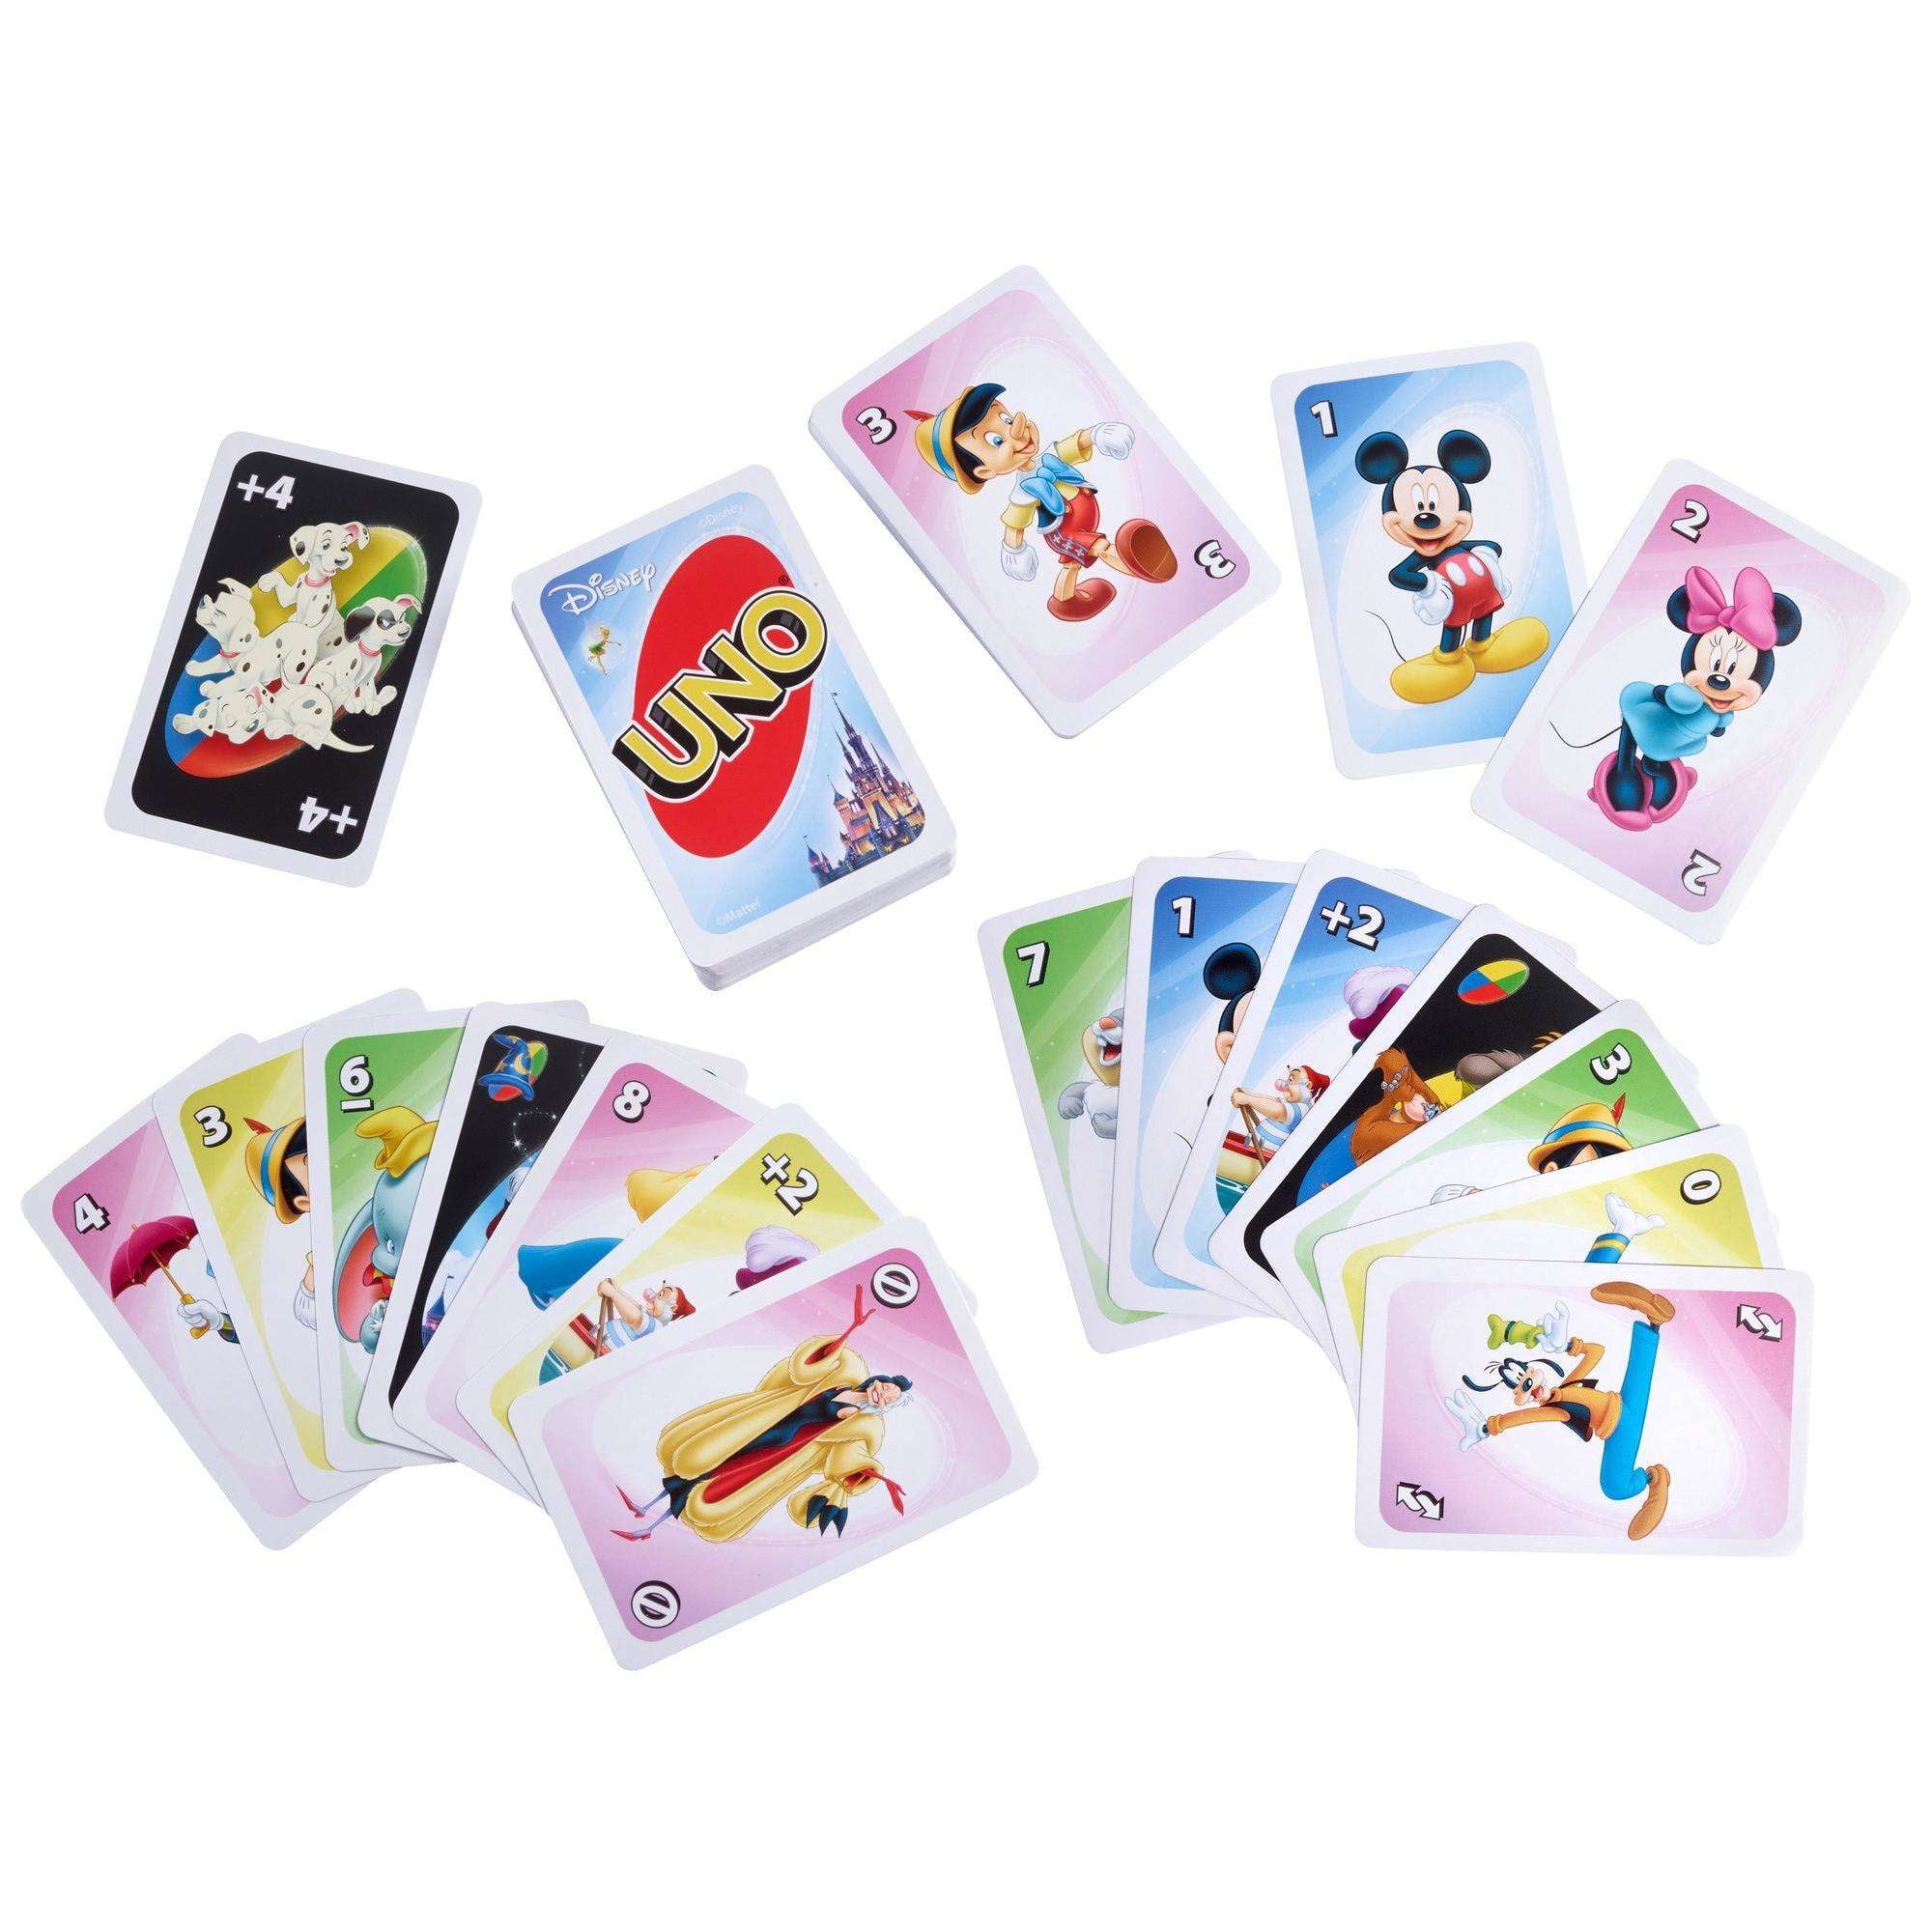 GitHub - bmartin5263/Uno-Online-Multiplayer: Recreation of the classic card  game Uno now with online multiplayer support!